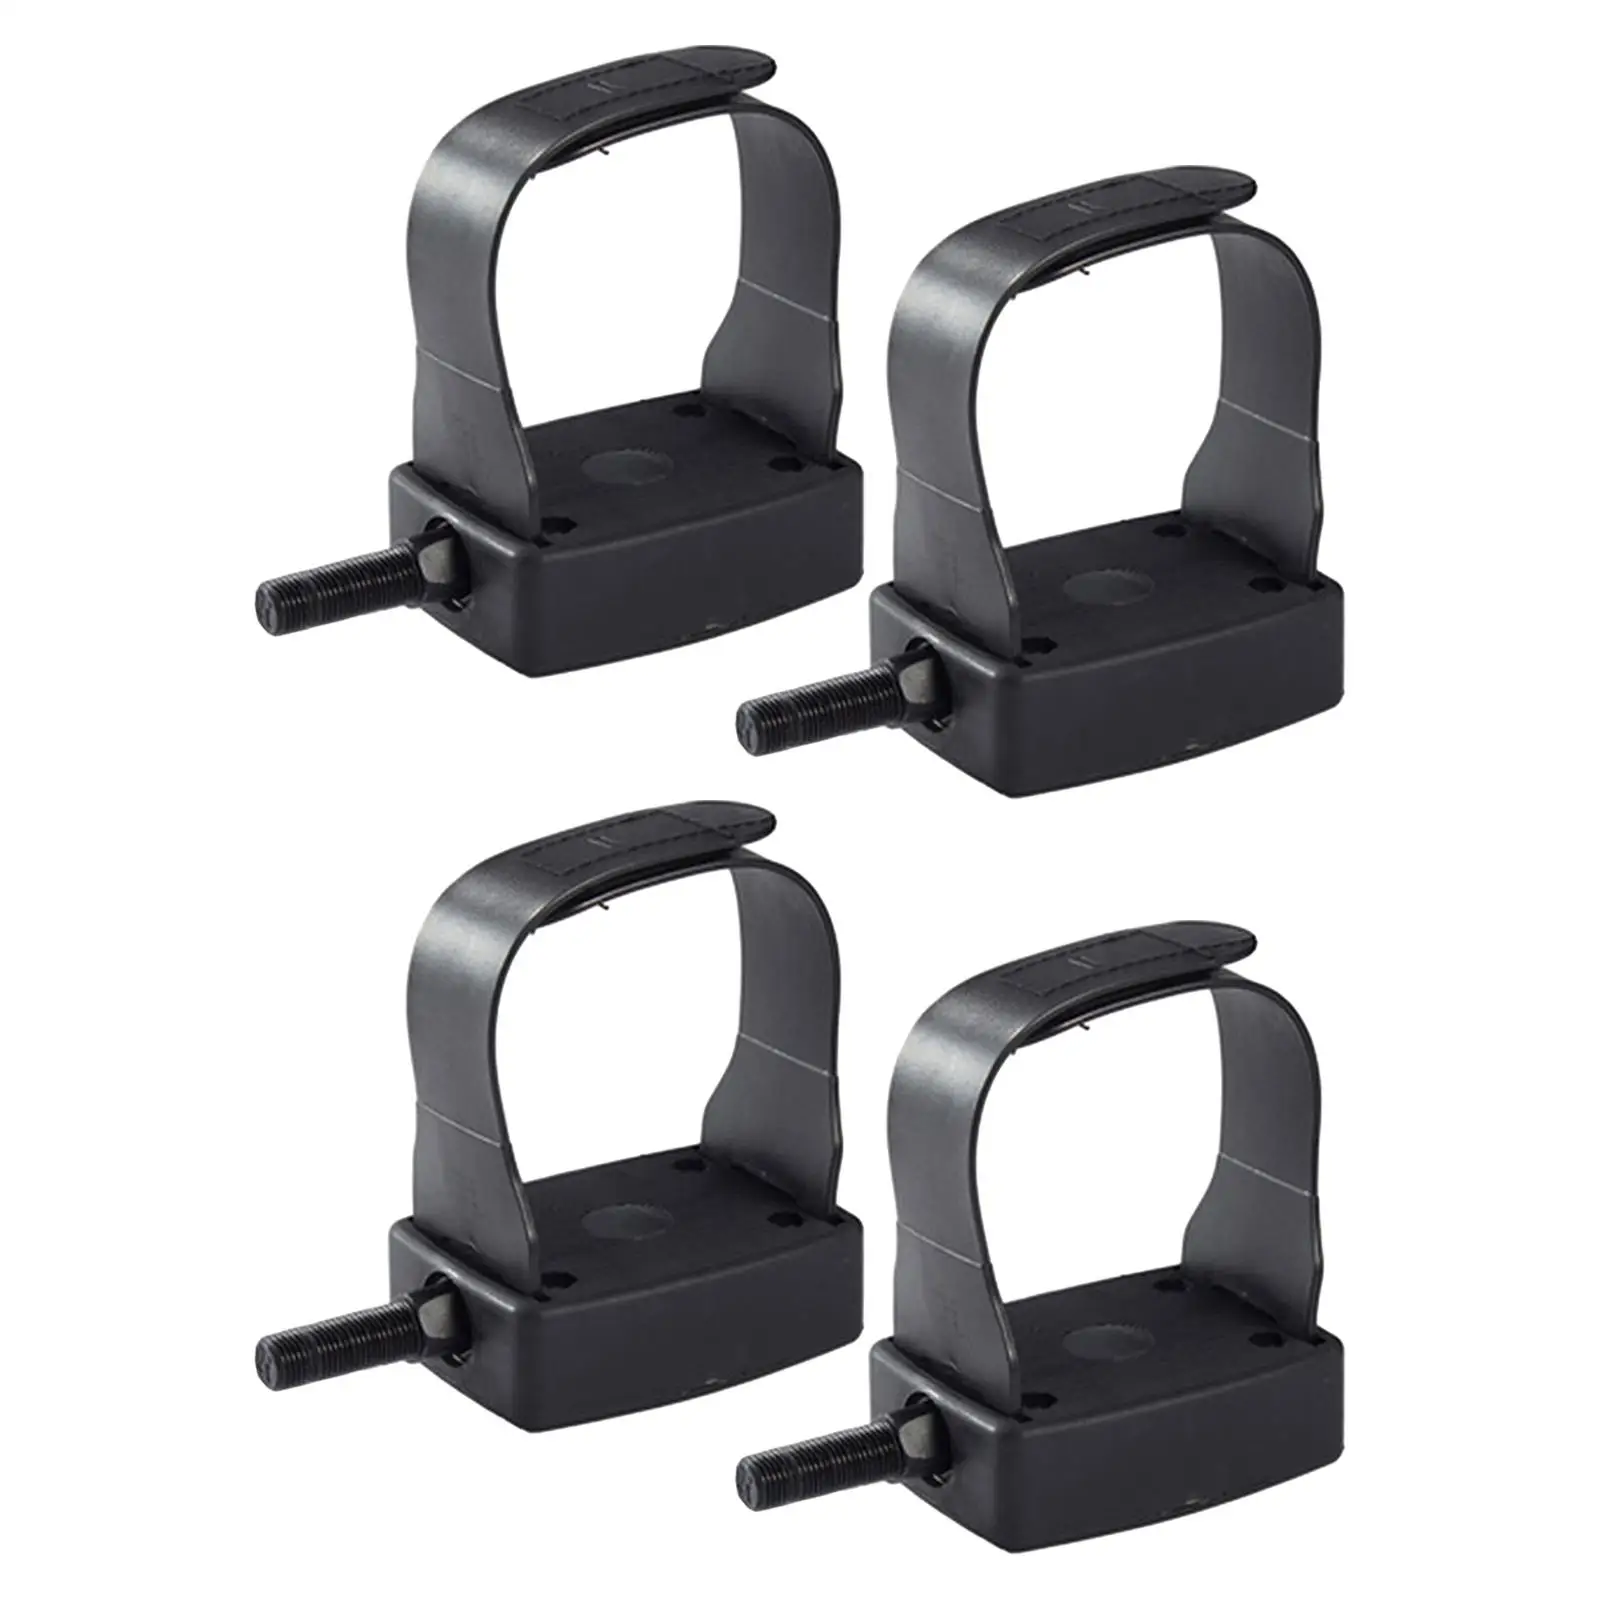 Exercise Bike Pedals Non Slip 2 Pieces for Stationary Bike Fitness Bikes Home/Office Workout Recumbent Bicycle Indoor Cycling